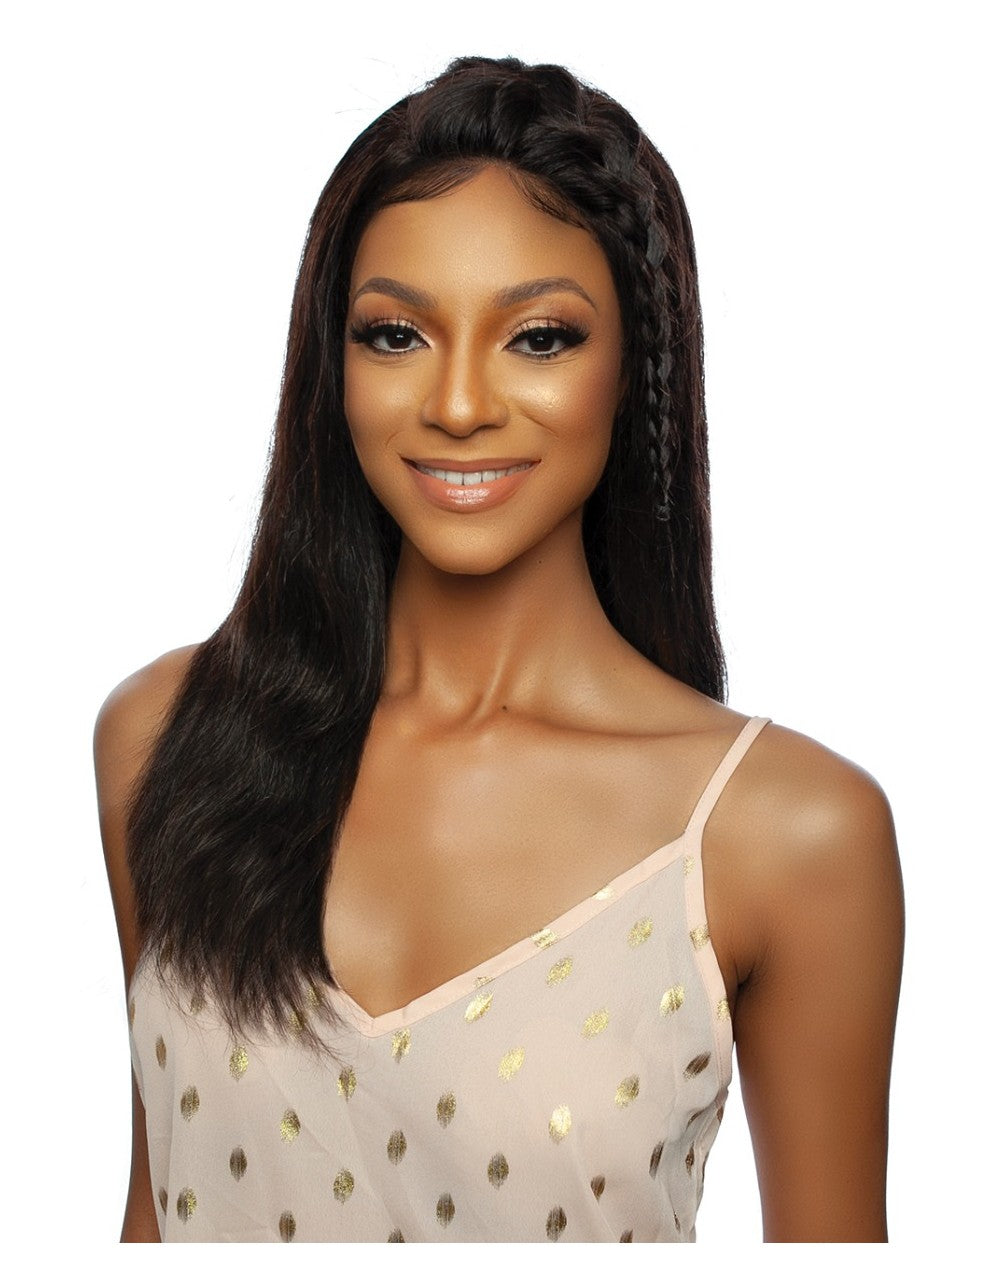 13A HD 13X4 Lace Front Straight Human Wig (TROE205) 22"